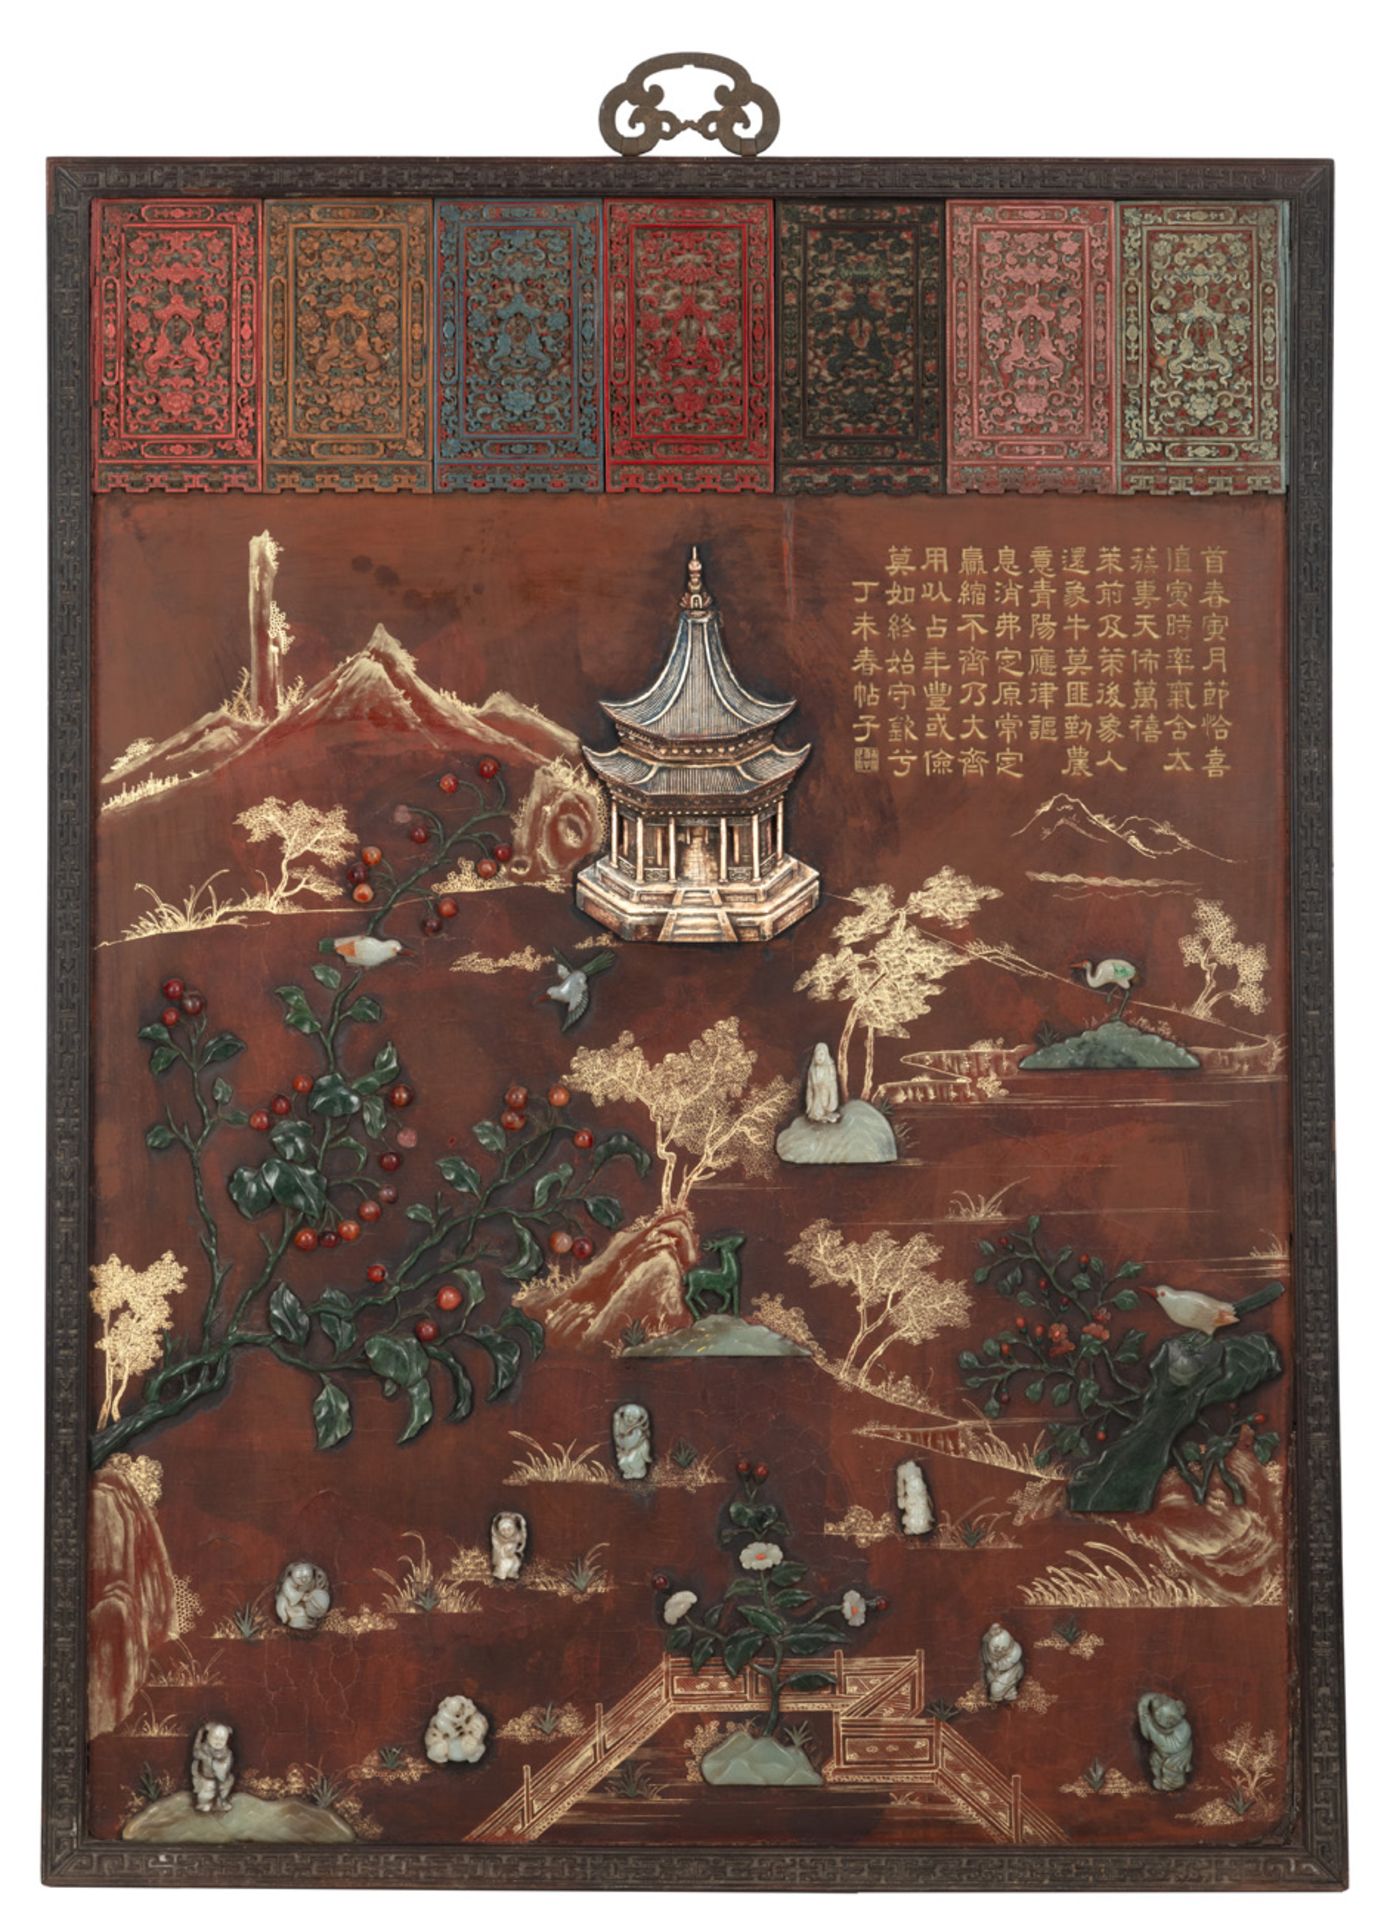 AN INSCRIBED AND EMBELLISHED LACQUER WOOD PANEL